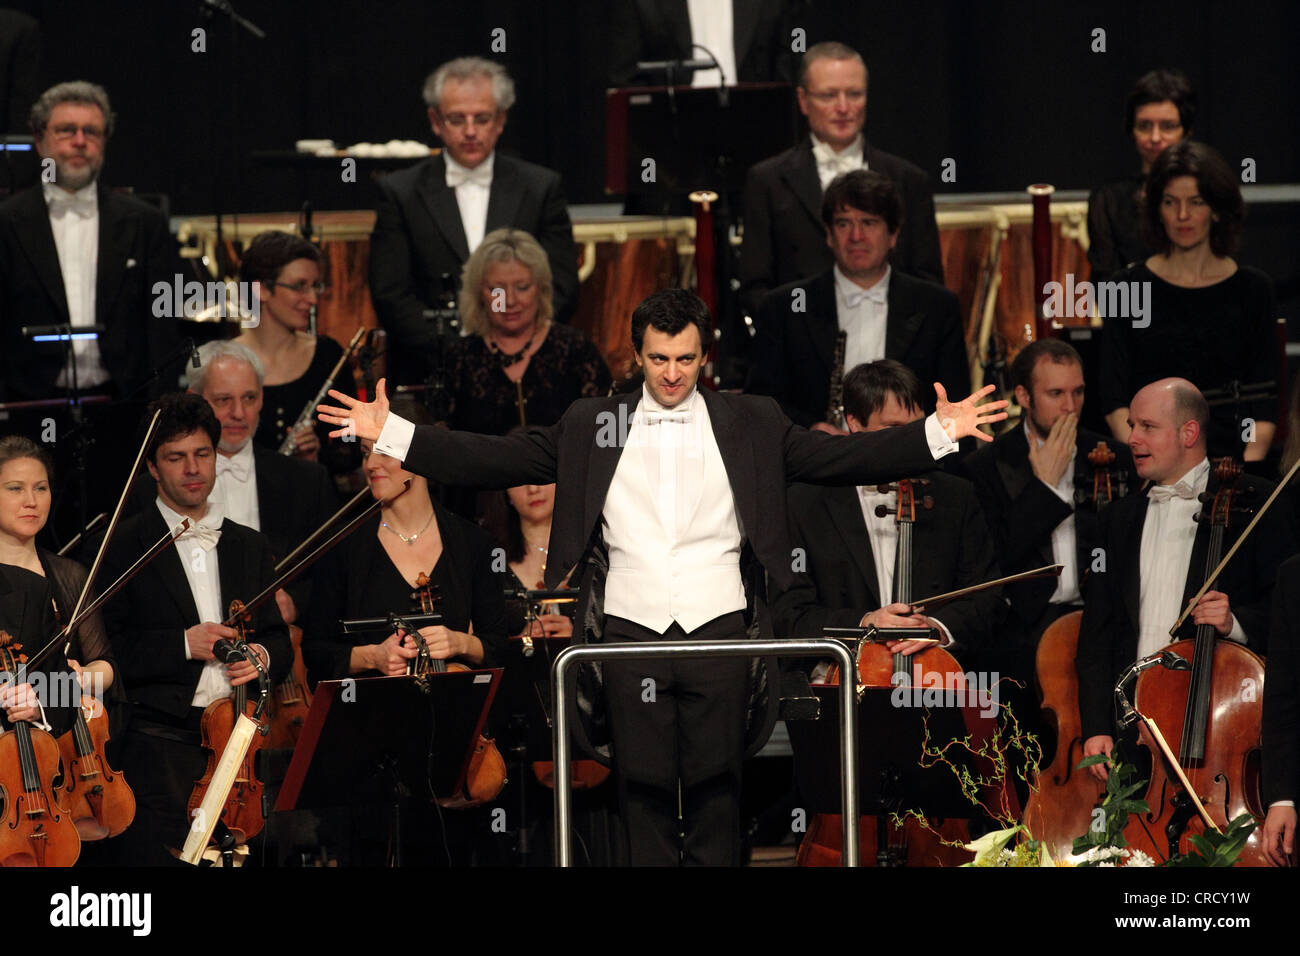 Concert of the Music Institute Koblenz with the SWR Symphony Orchestra Baden-Baden and Freiburg, conductor Alejo Pérez, Koblenz Stock Photo